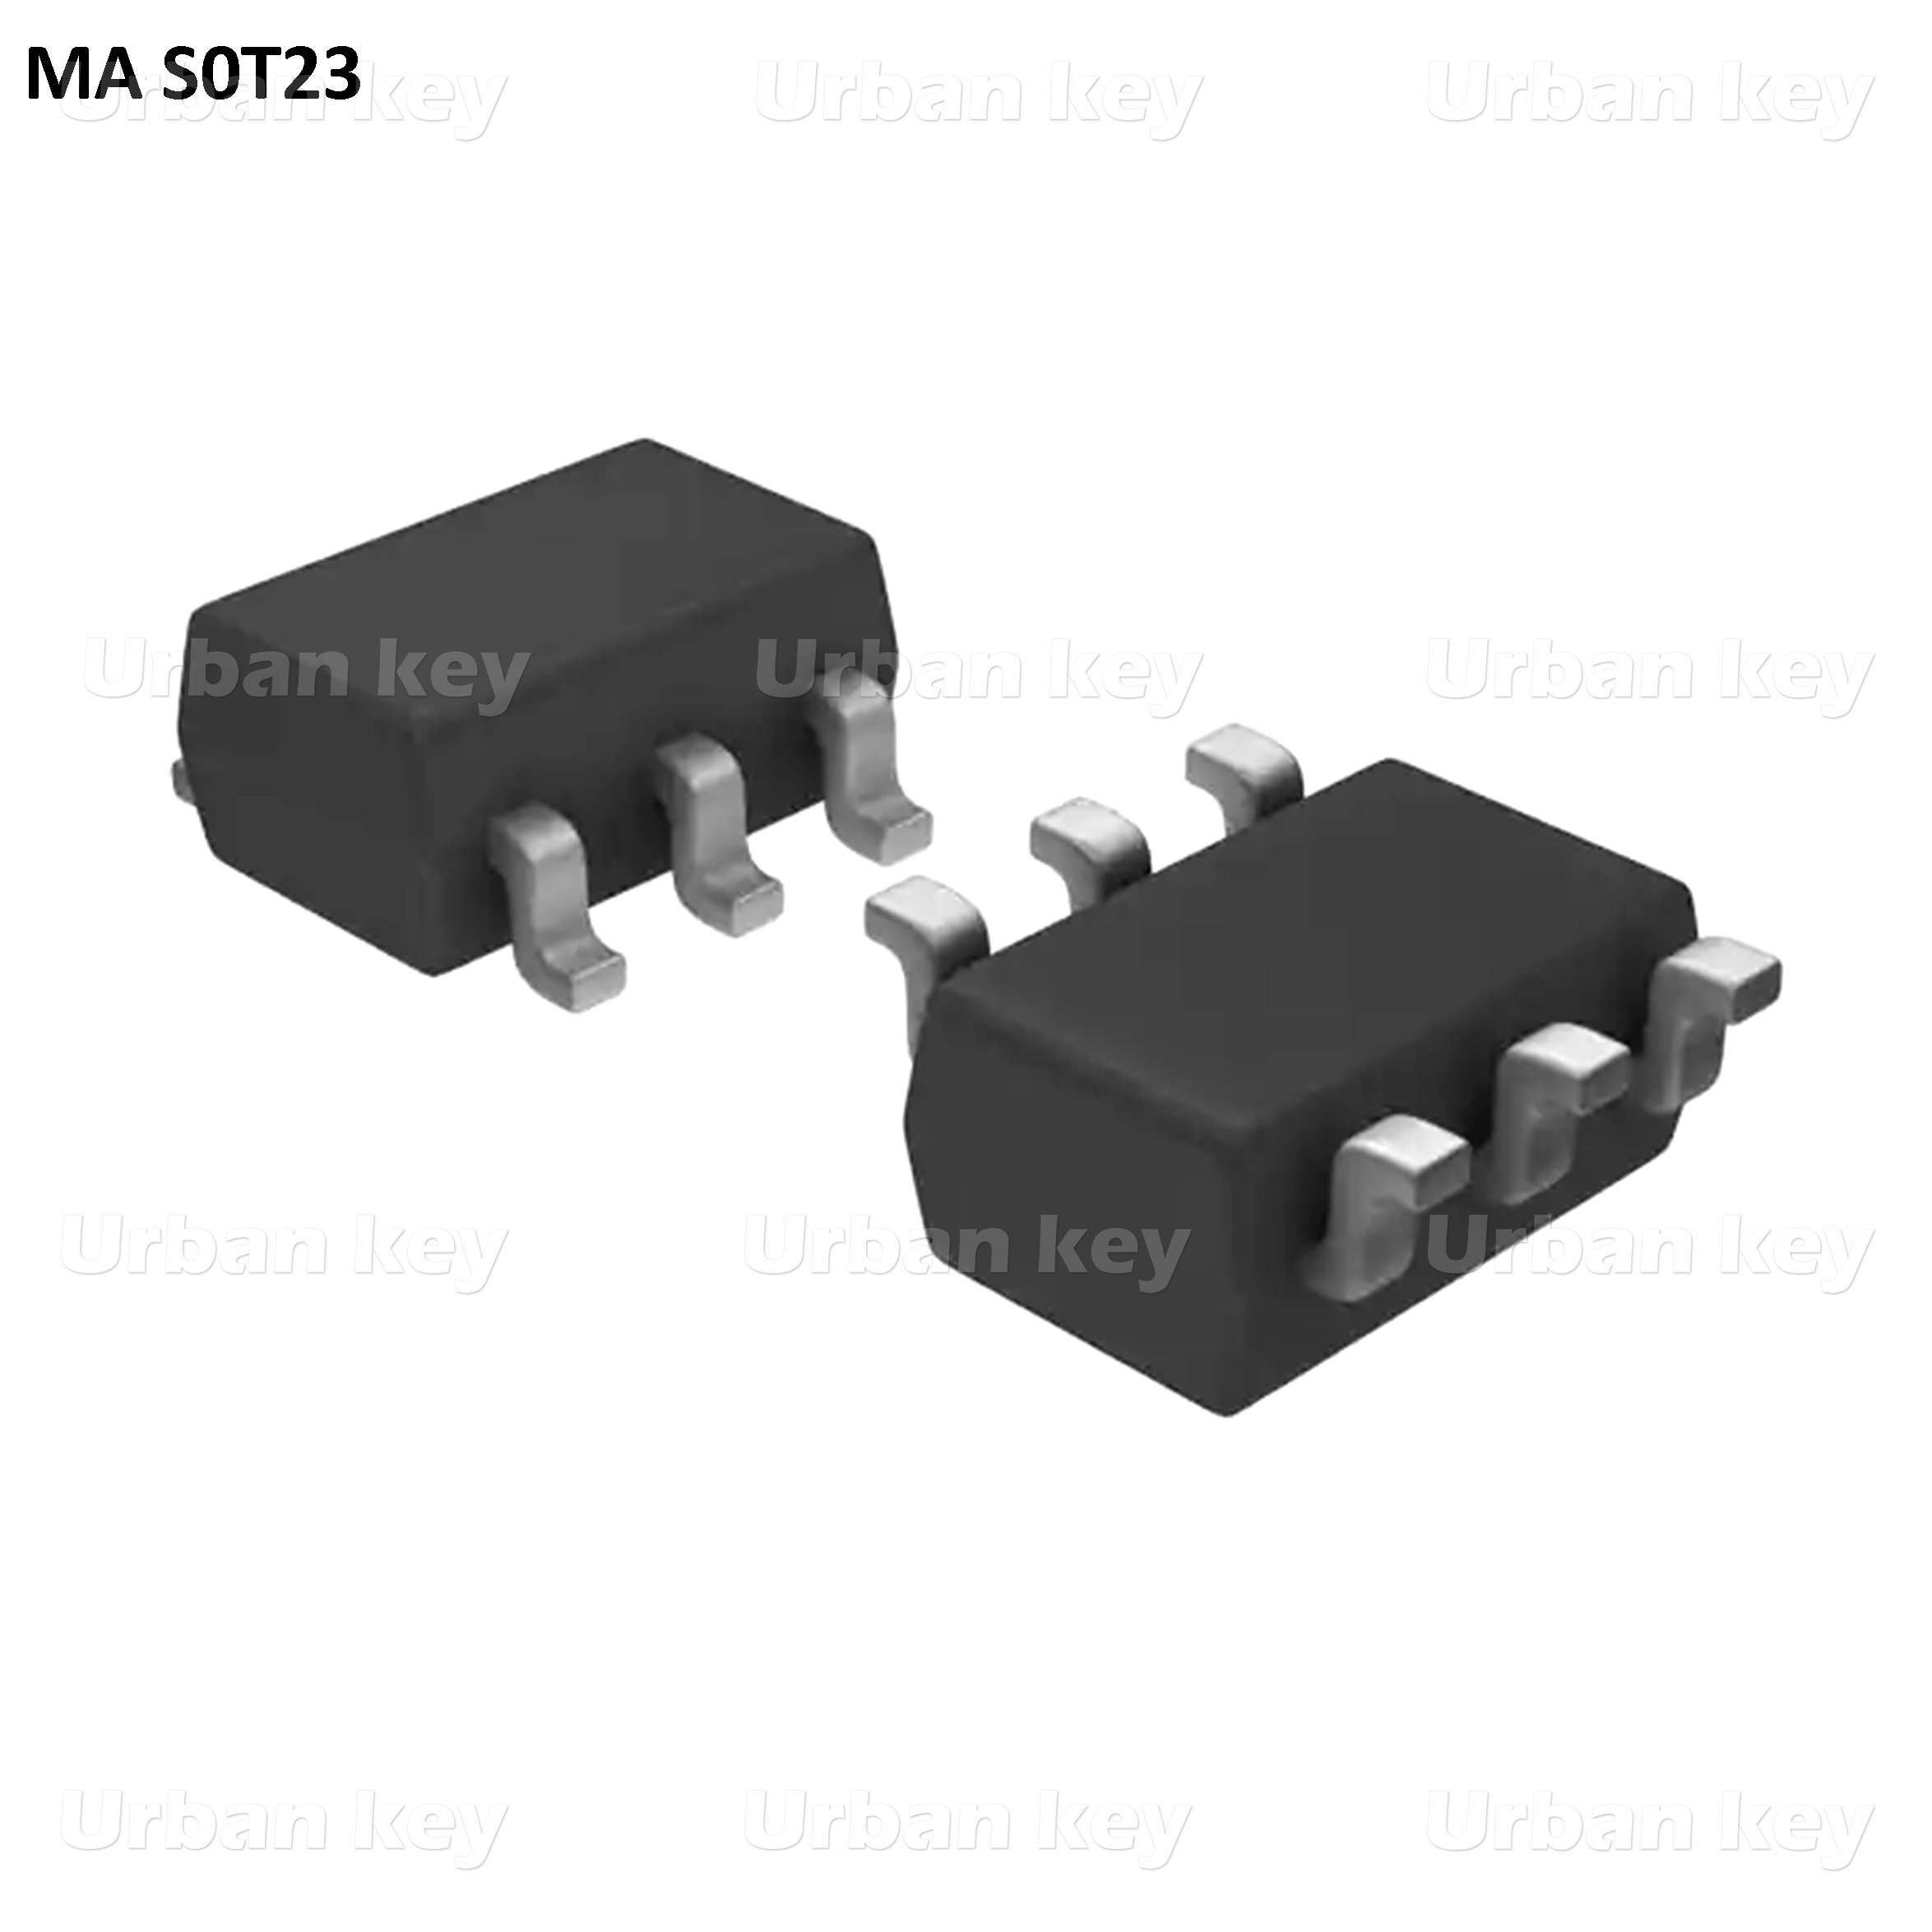 MOSFET MA S0T23